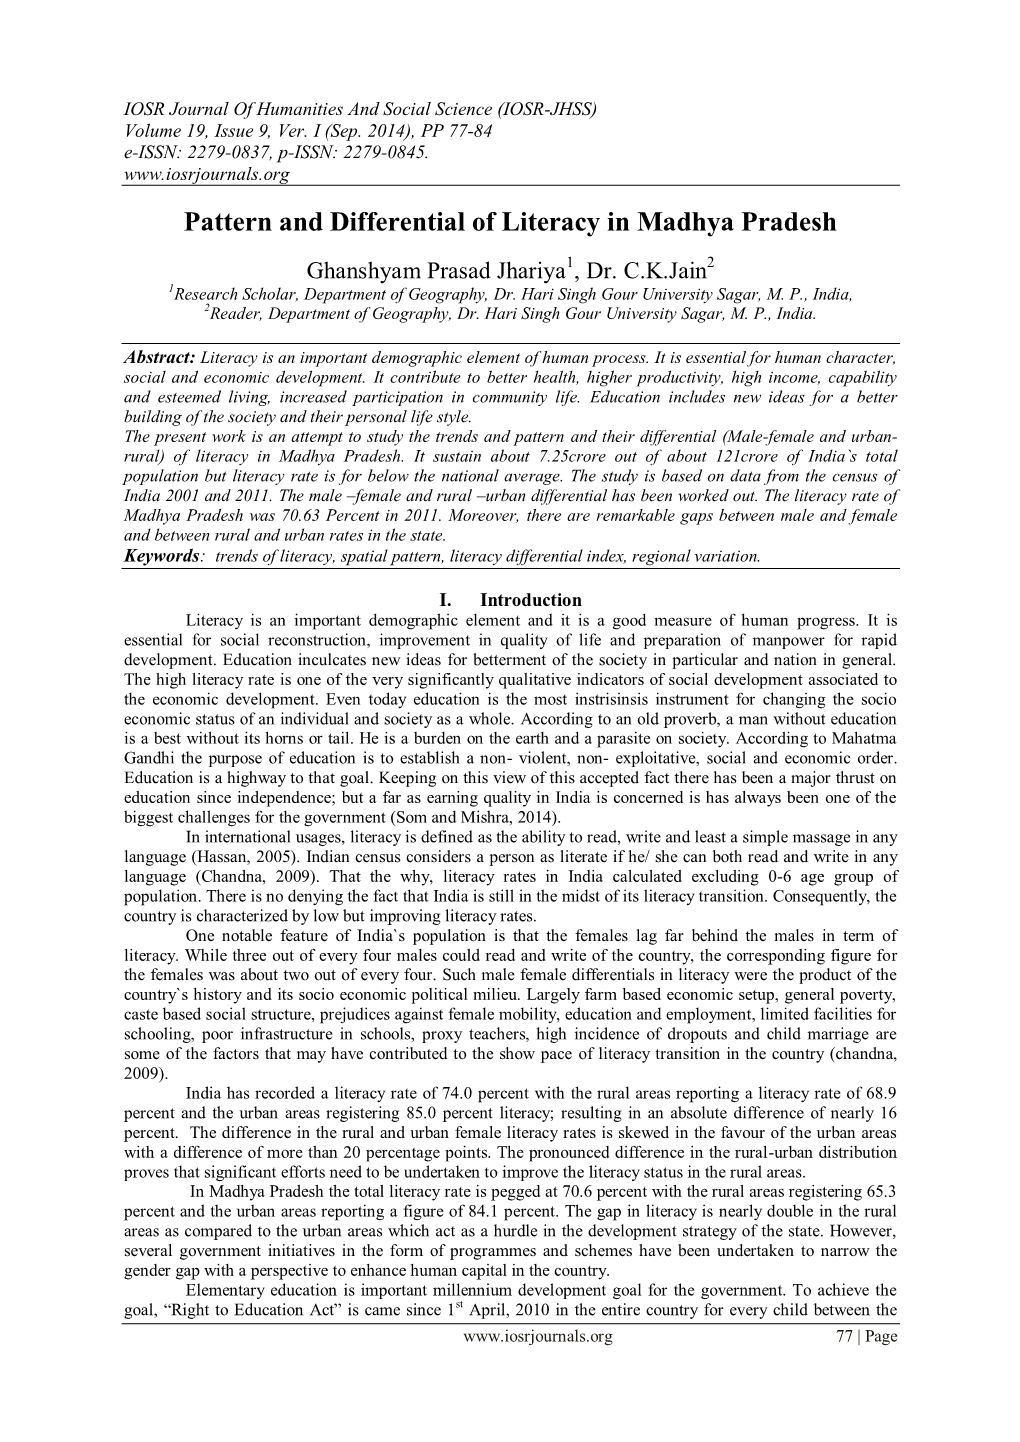 Pattern and Differential of Literacy in Madhya Pradesh